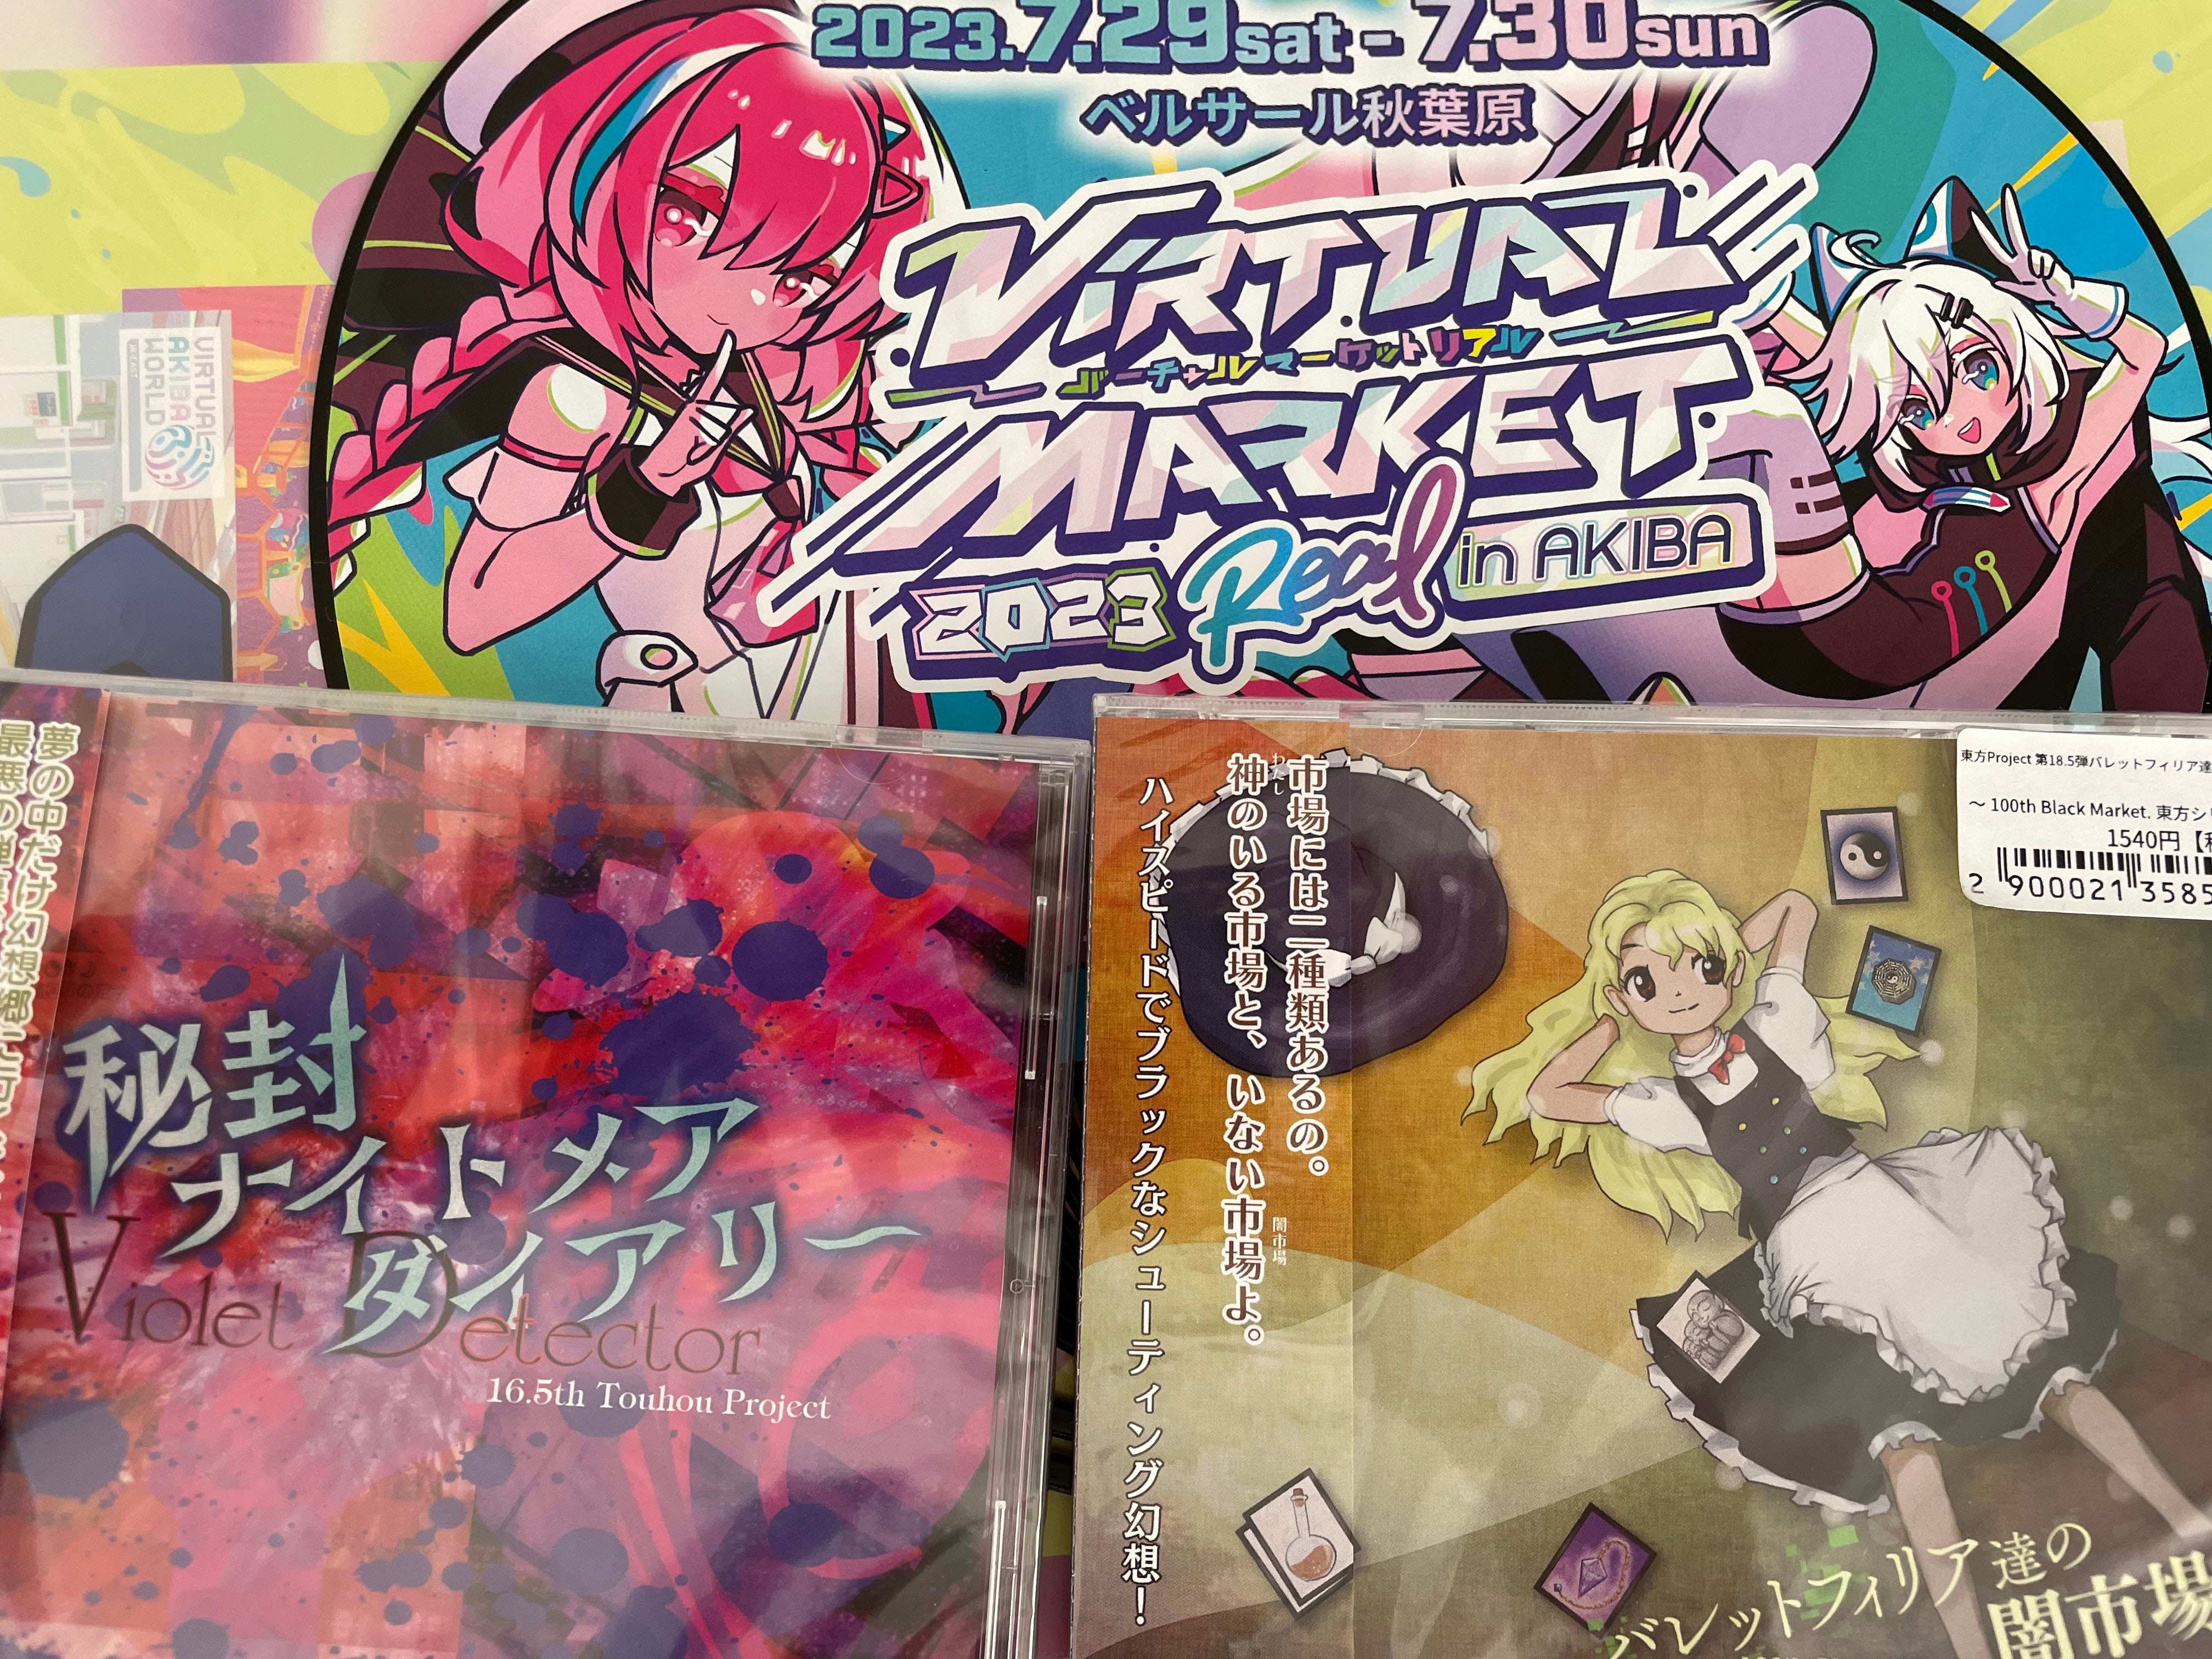 Touhou CDs and fan advertising VR event